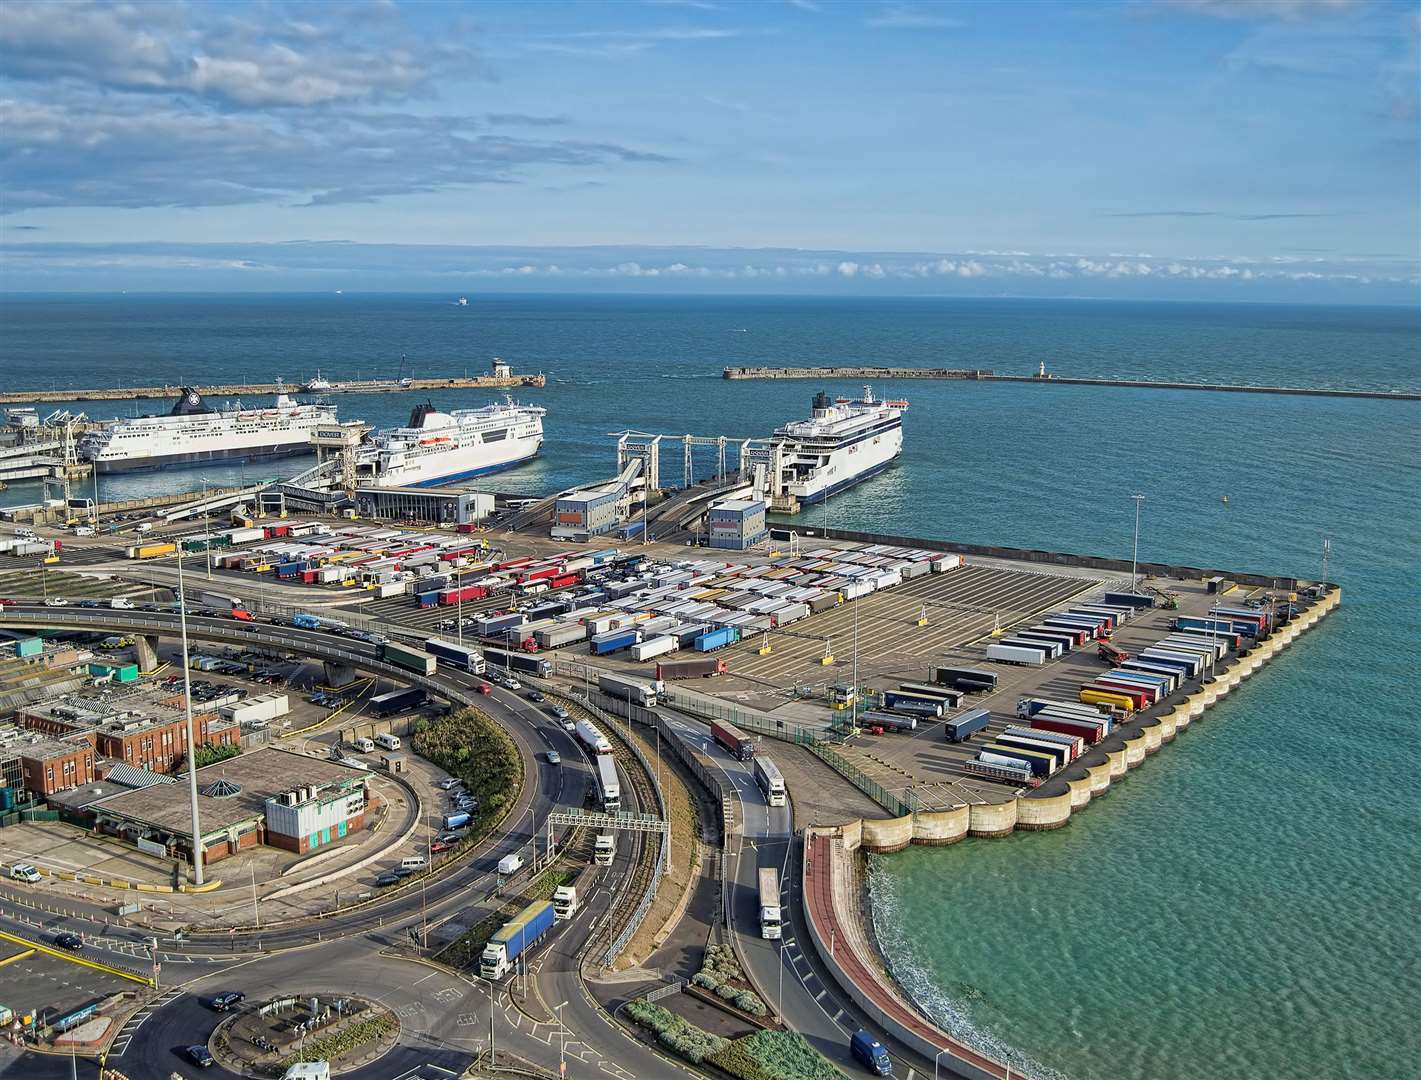 Dover Harbour Board, which runs the Port of Dover, has received a reprimand from the ICO